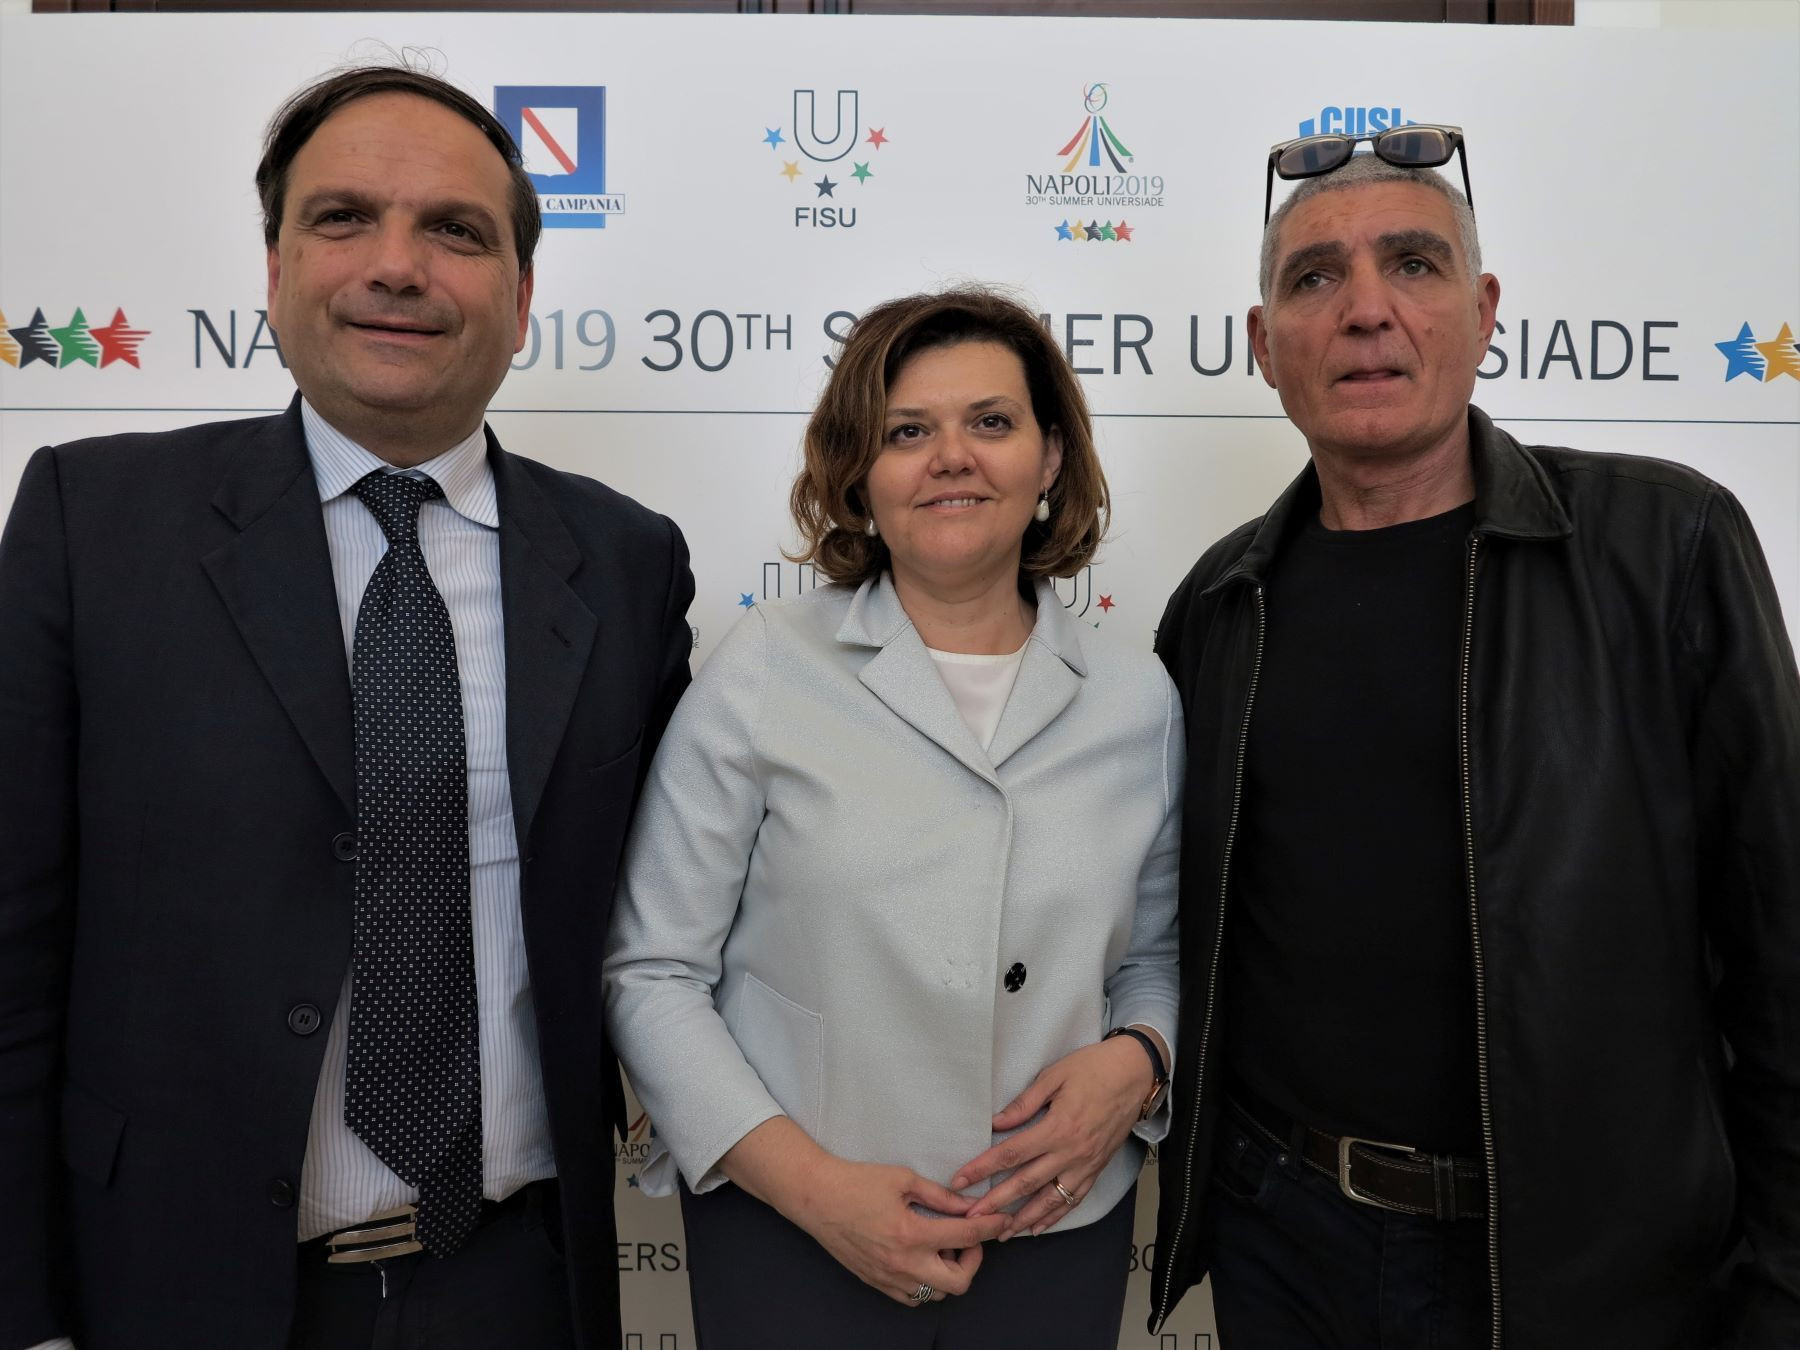 Young offenders to be given chance to take part in Naples 2019 Opening Ceremony 